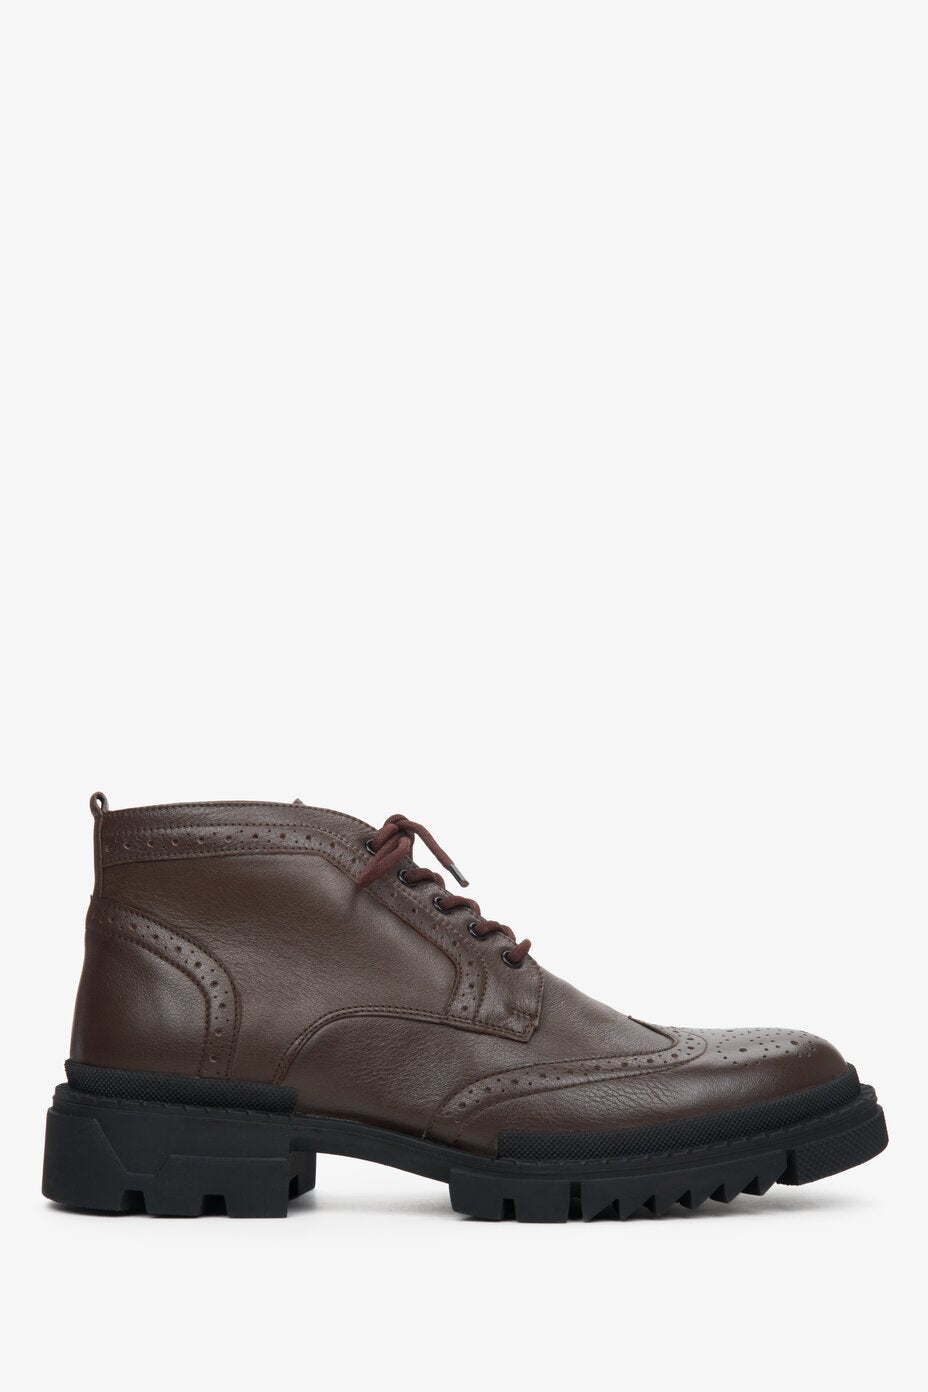 Tall, men's brown winter boots made of genuine leather with laces, from the Estro brand - shoe profile.